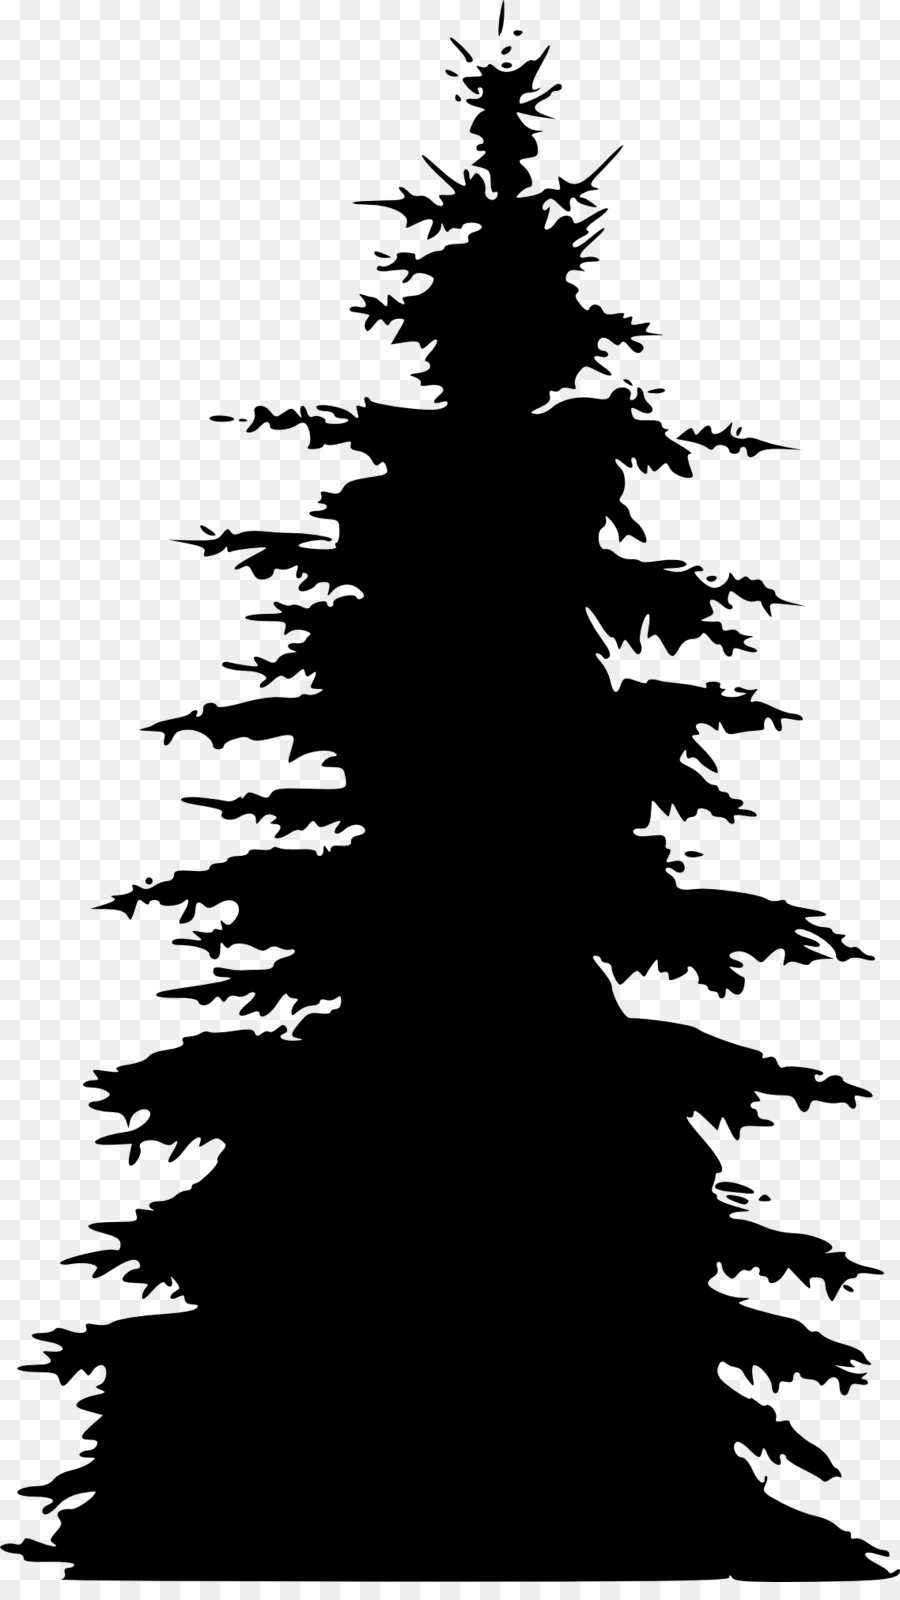 Pine Fir Spruce Tree Silhouette - pine tree png download - 1138*2000 - Free Transparent Pine png Download.